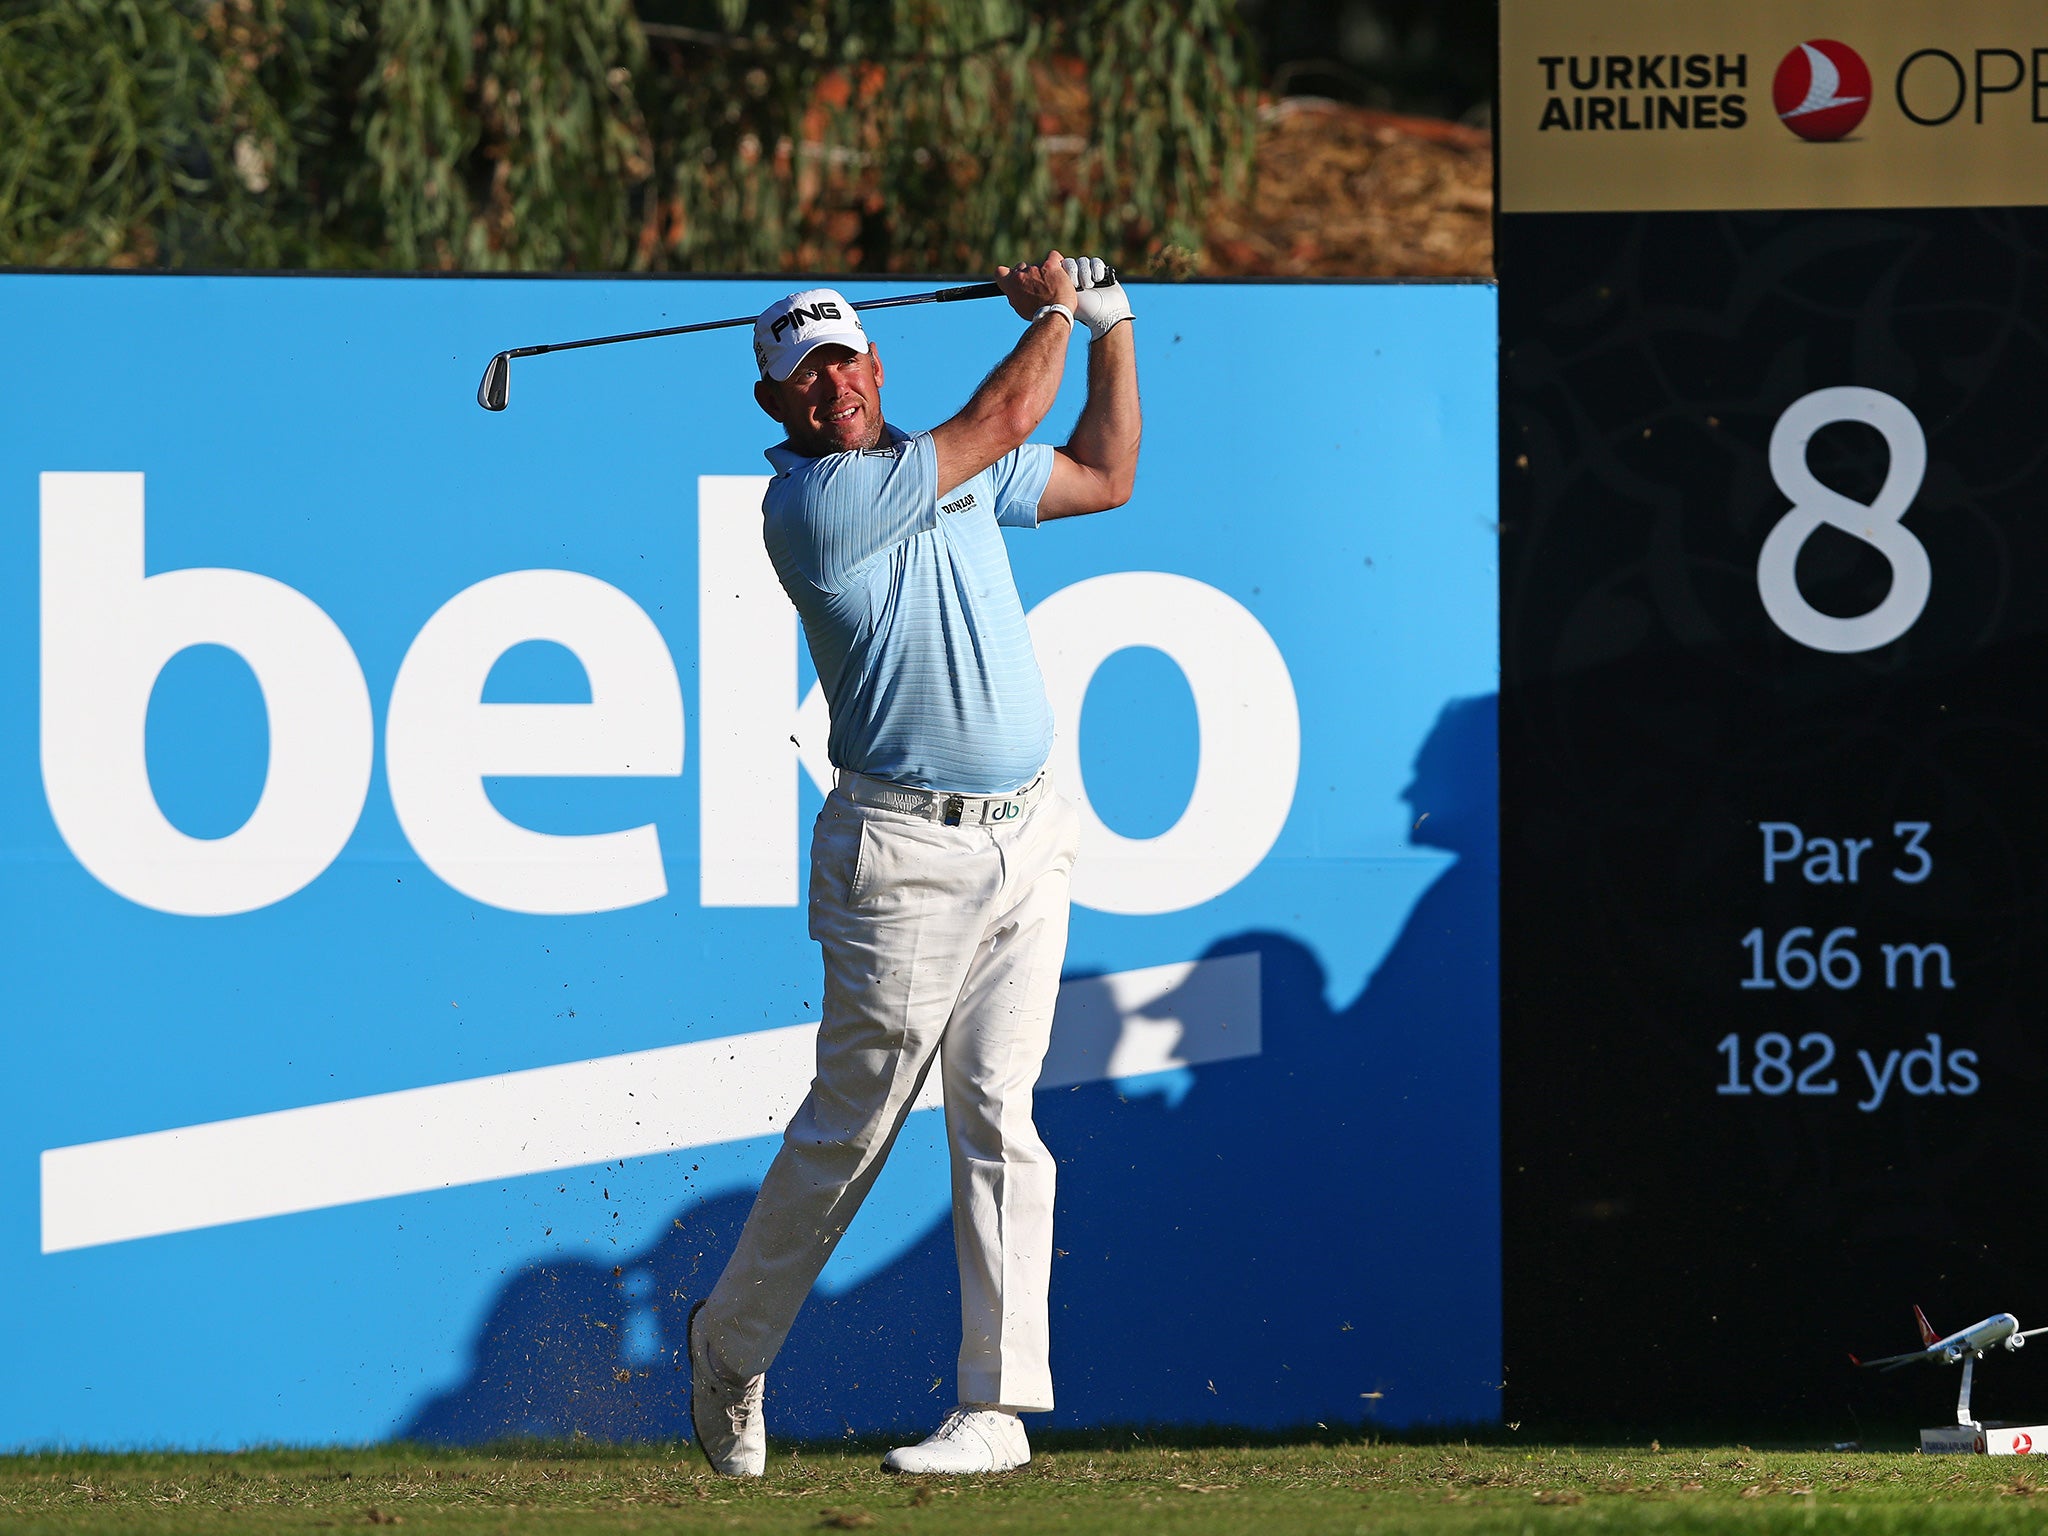 Lee Westwood shot his lowest round for 14 months with a 64